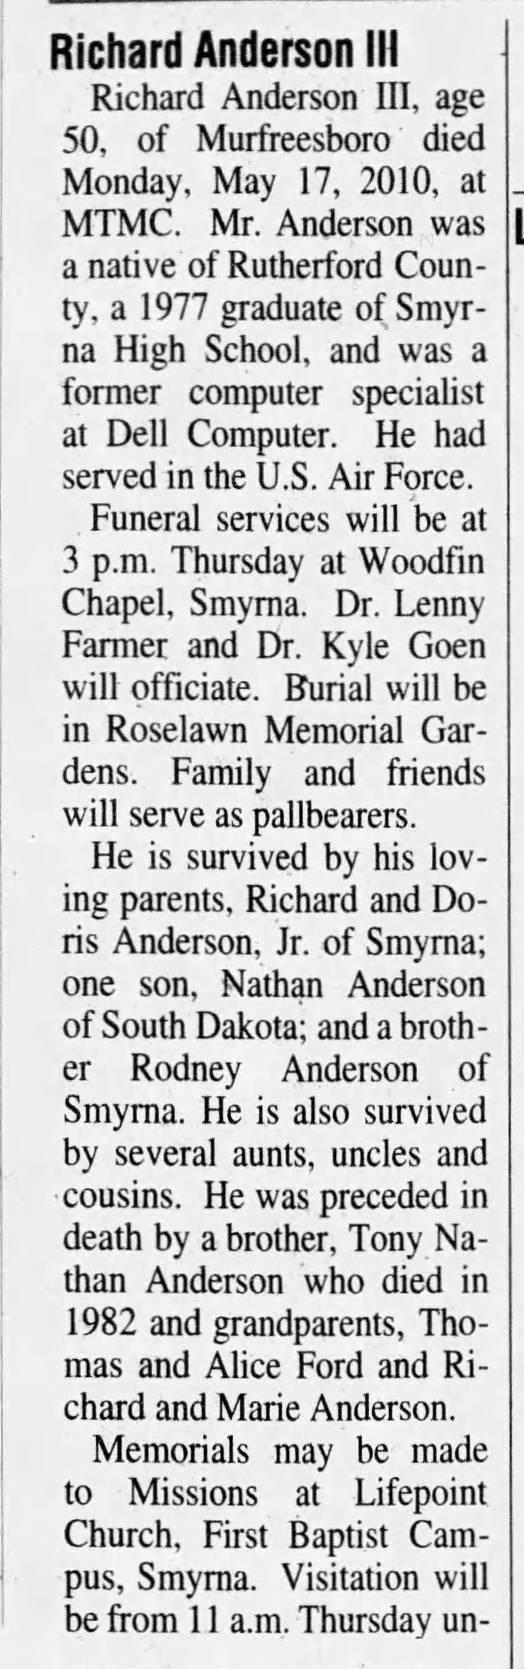 Richard Anderson III obit, The Daily News-Journal, Murfreesboro, Tennessee, 19 May 2010, pg 6